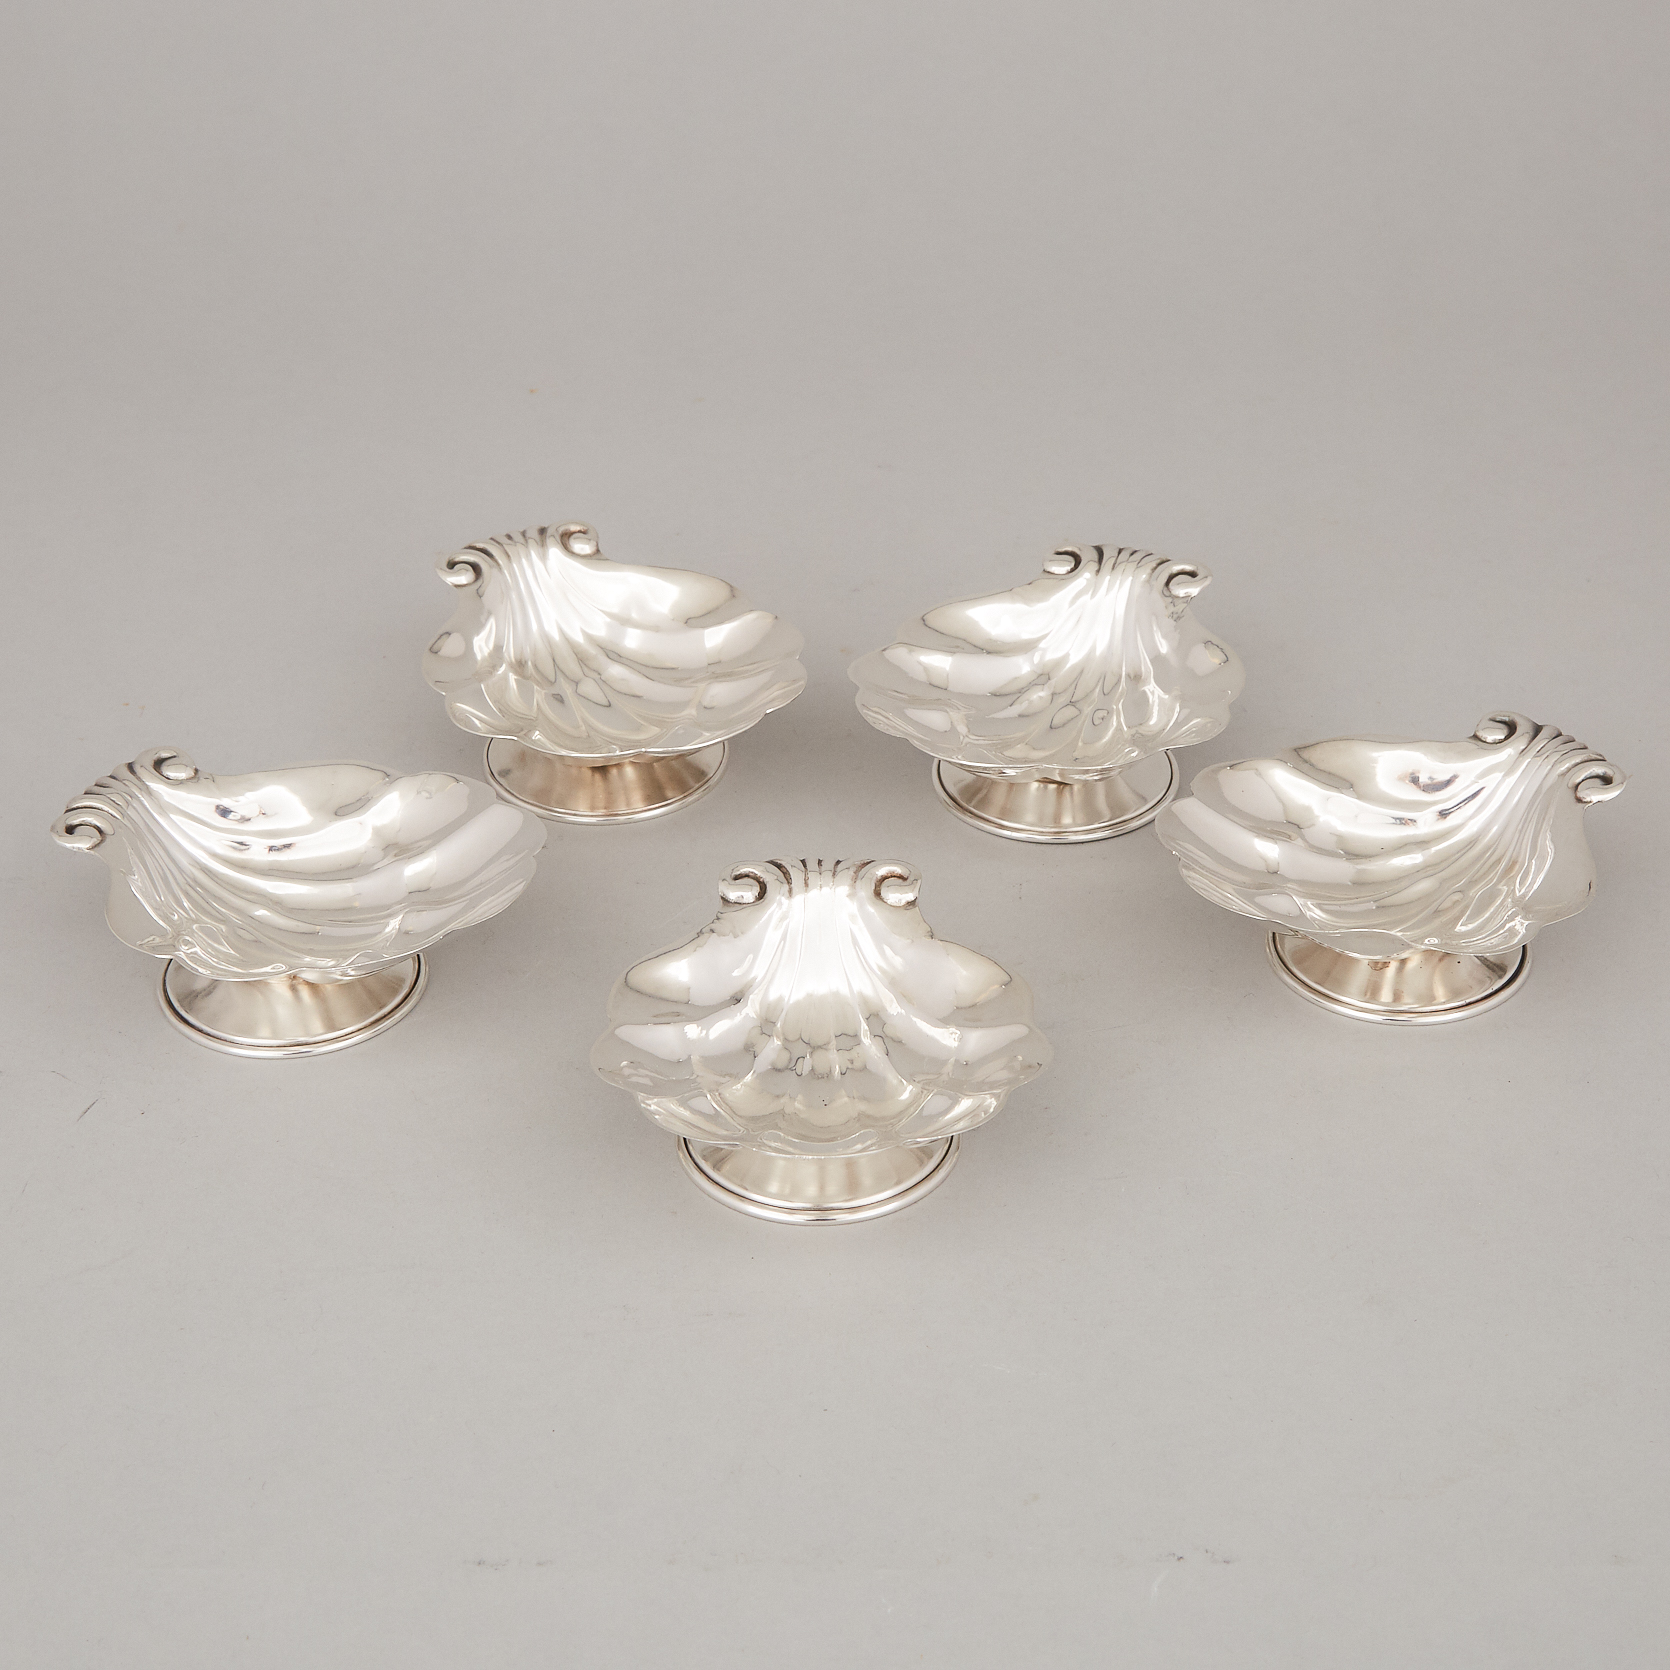 Five Canadian Silver Shell Shaped Nut Dishes, Carl Poul Petersen, Montreal, Que., mid-20th century